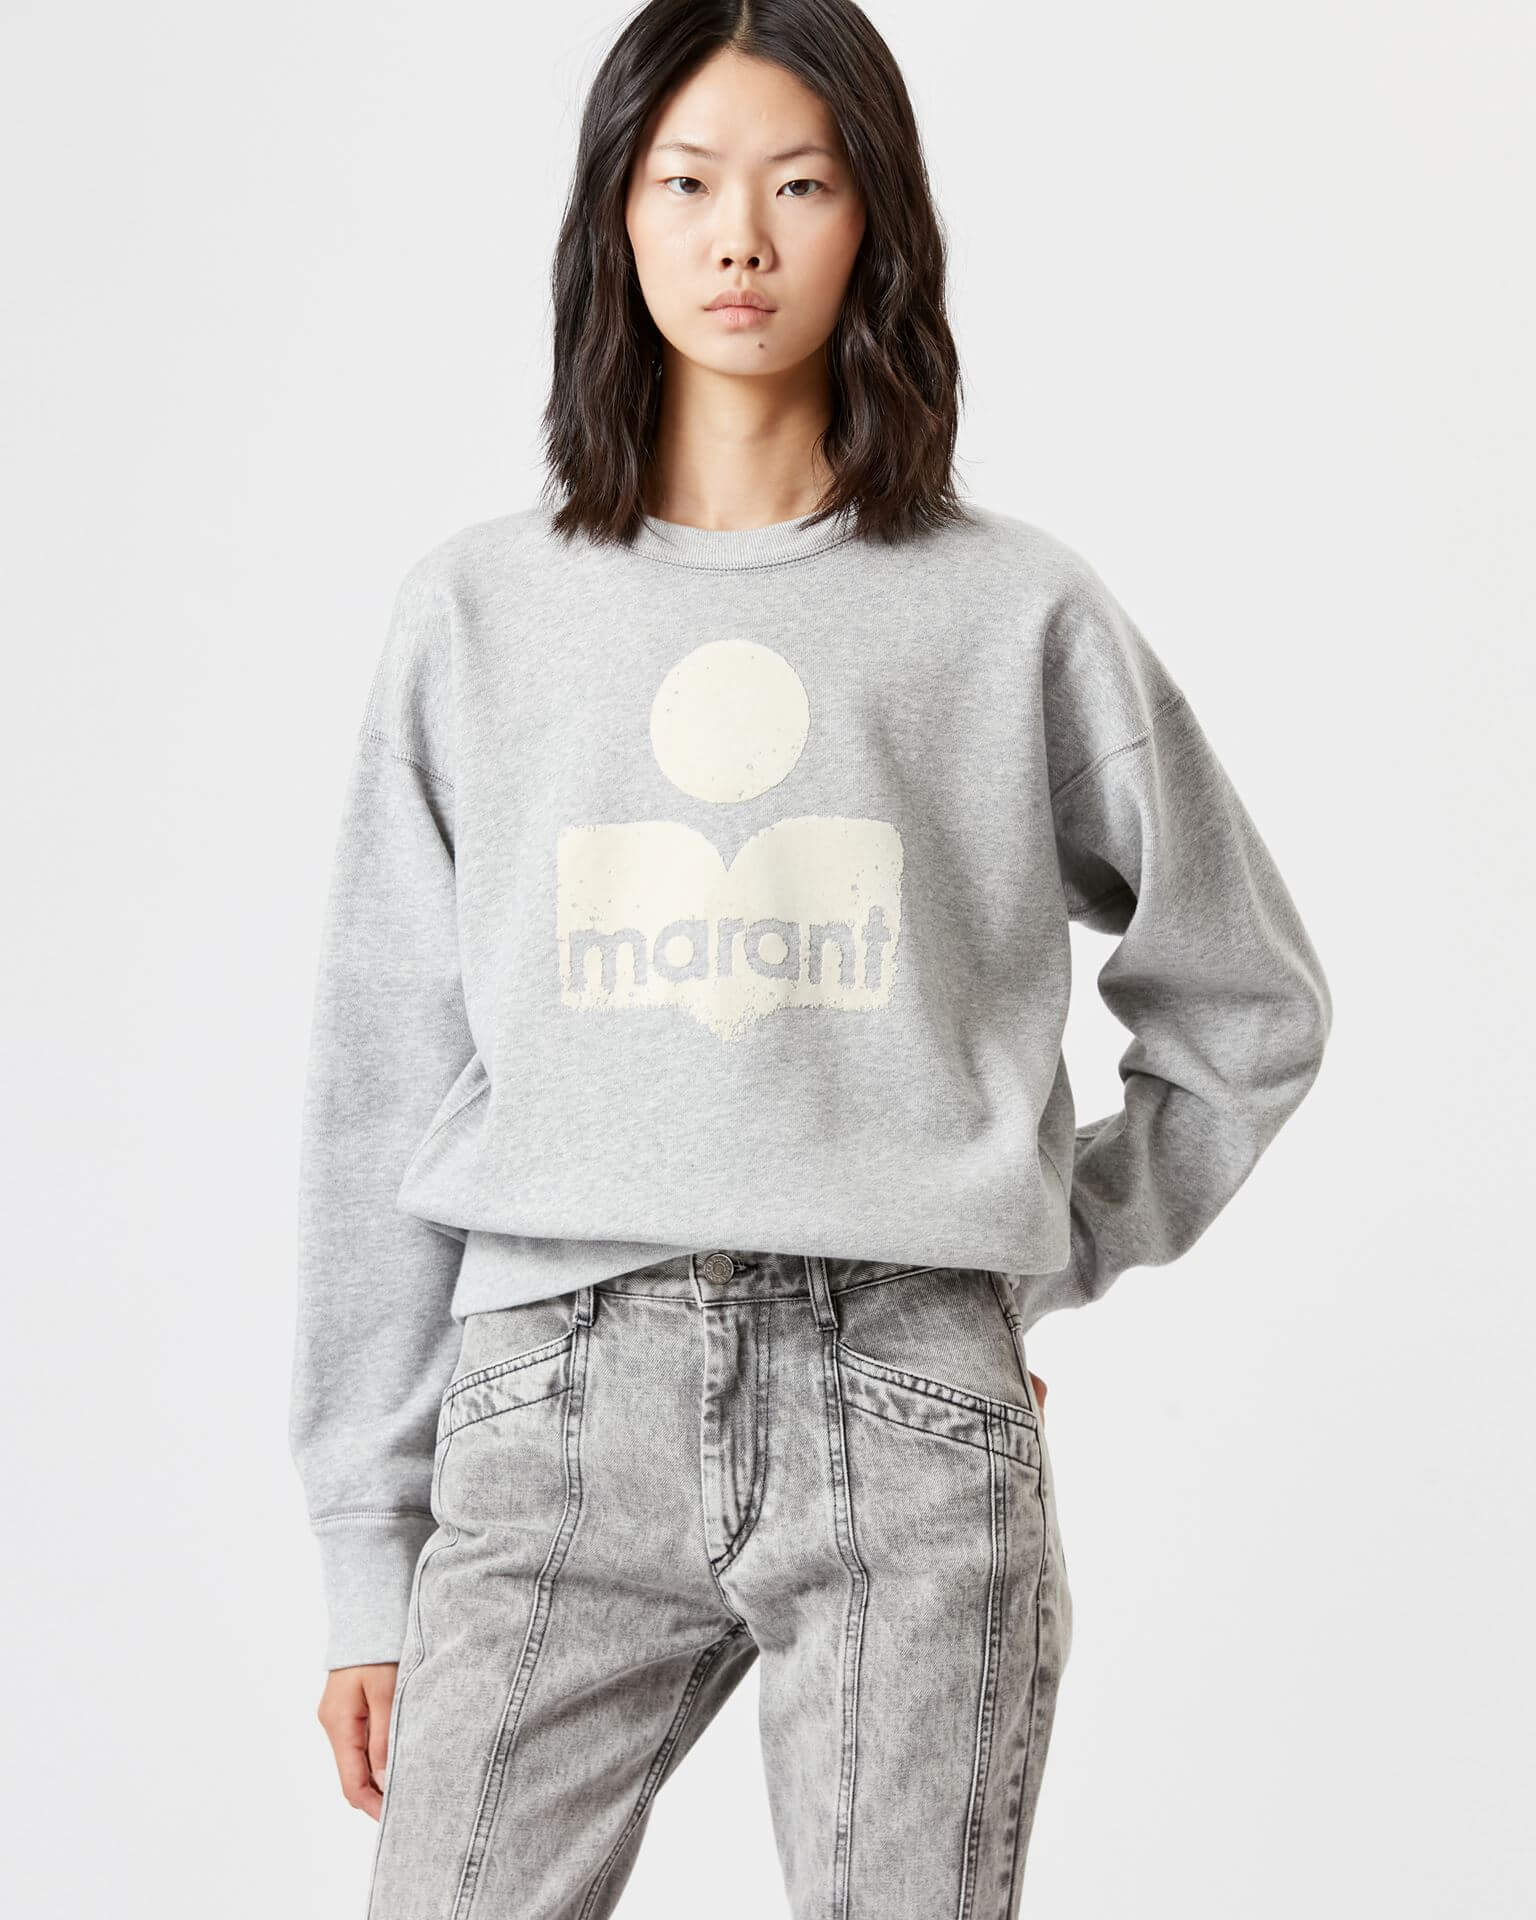 Isabel Marant Etoile Mobyli Sweatshirt in Grey available at TNT The New Trend Australia. Free shipping on orders over $300 AUD.